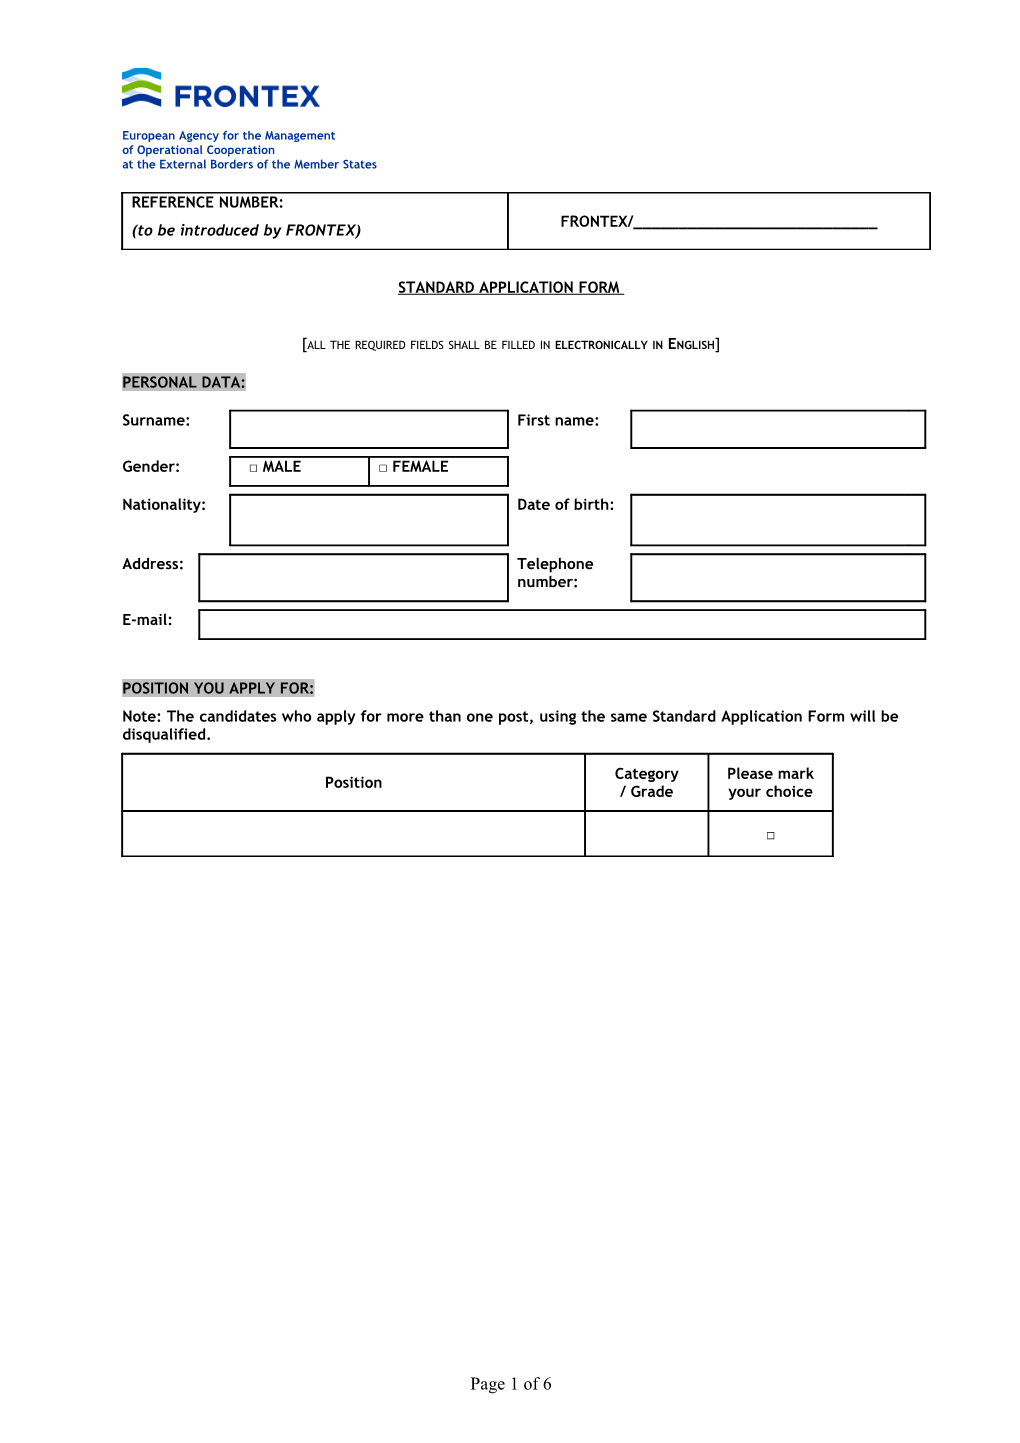 FRONTEX - END Application Form